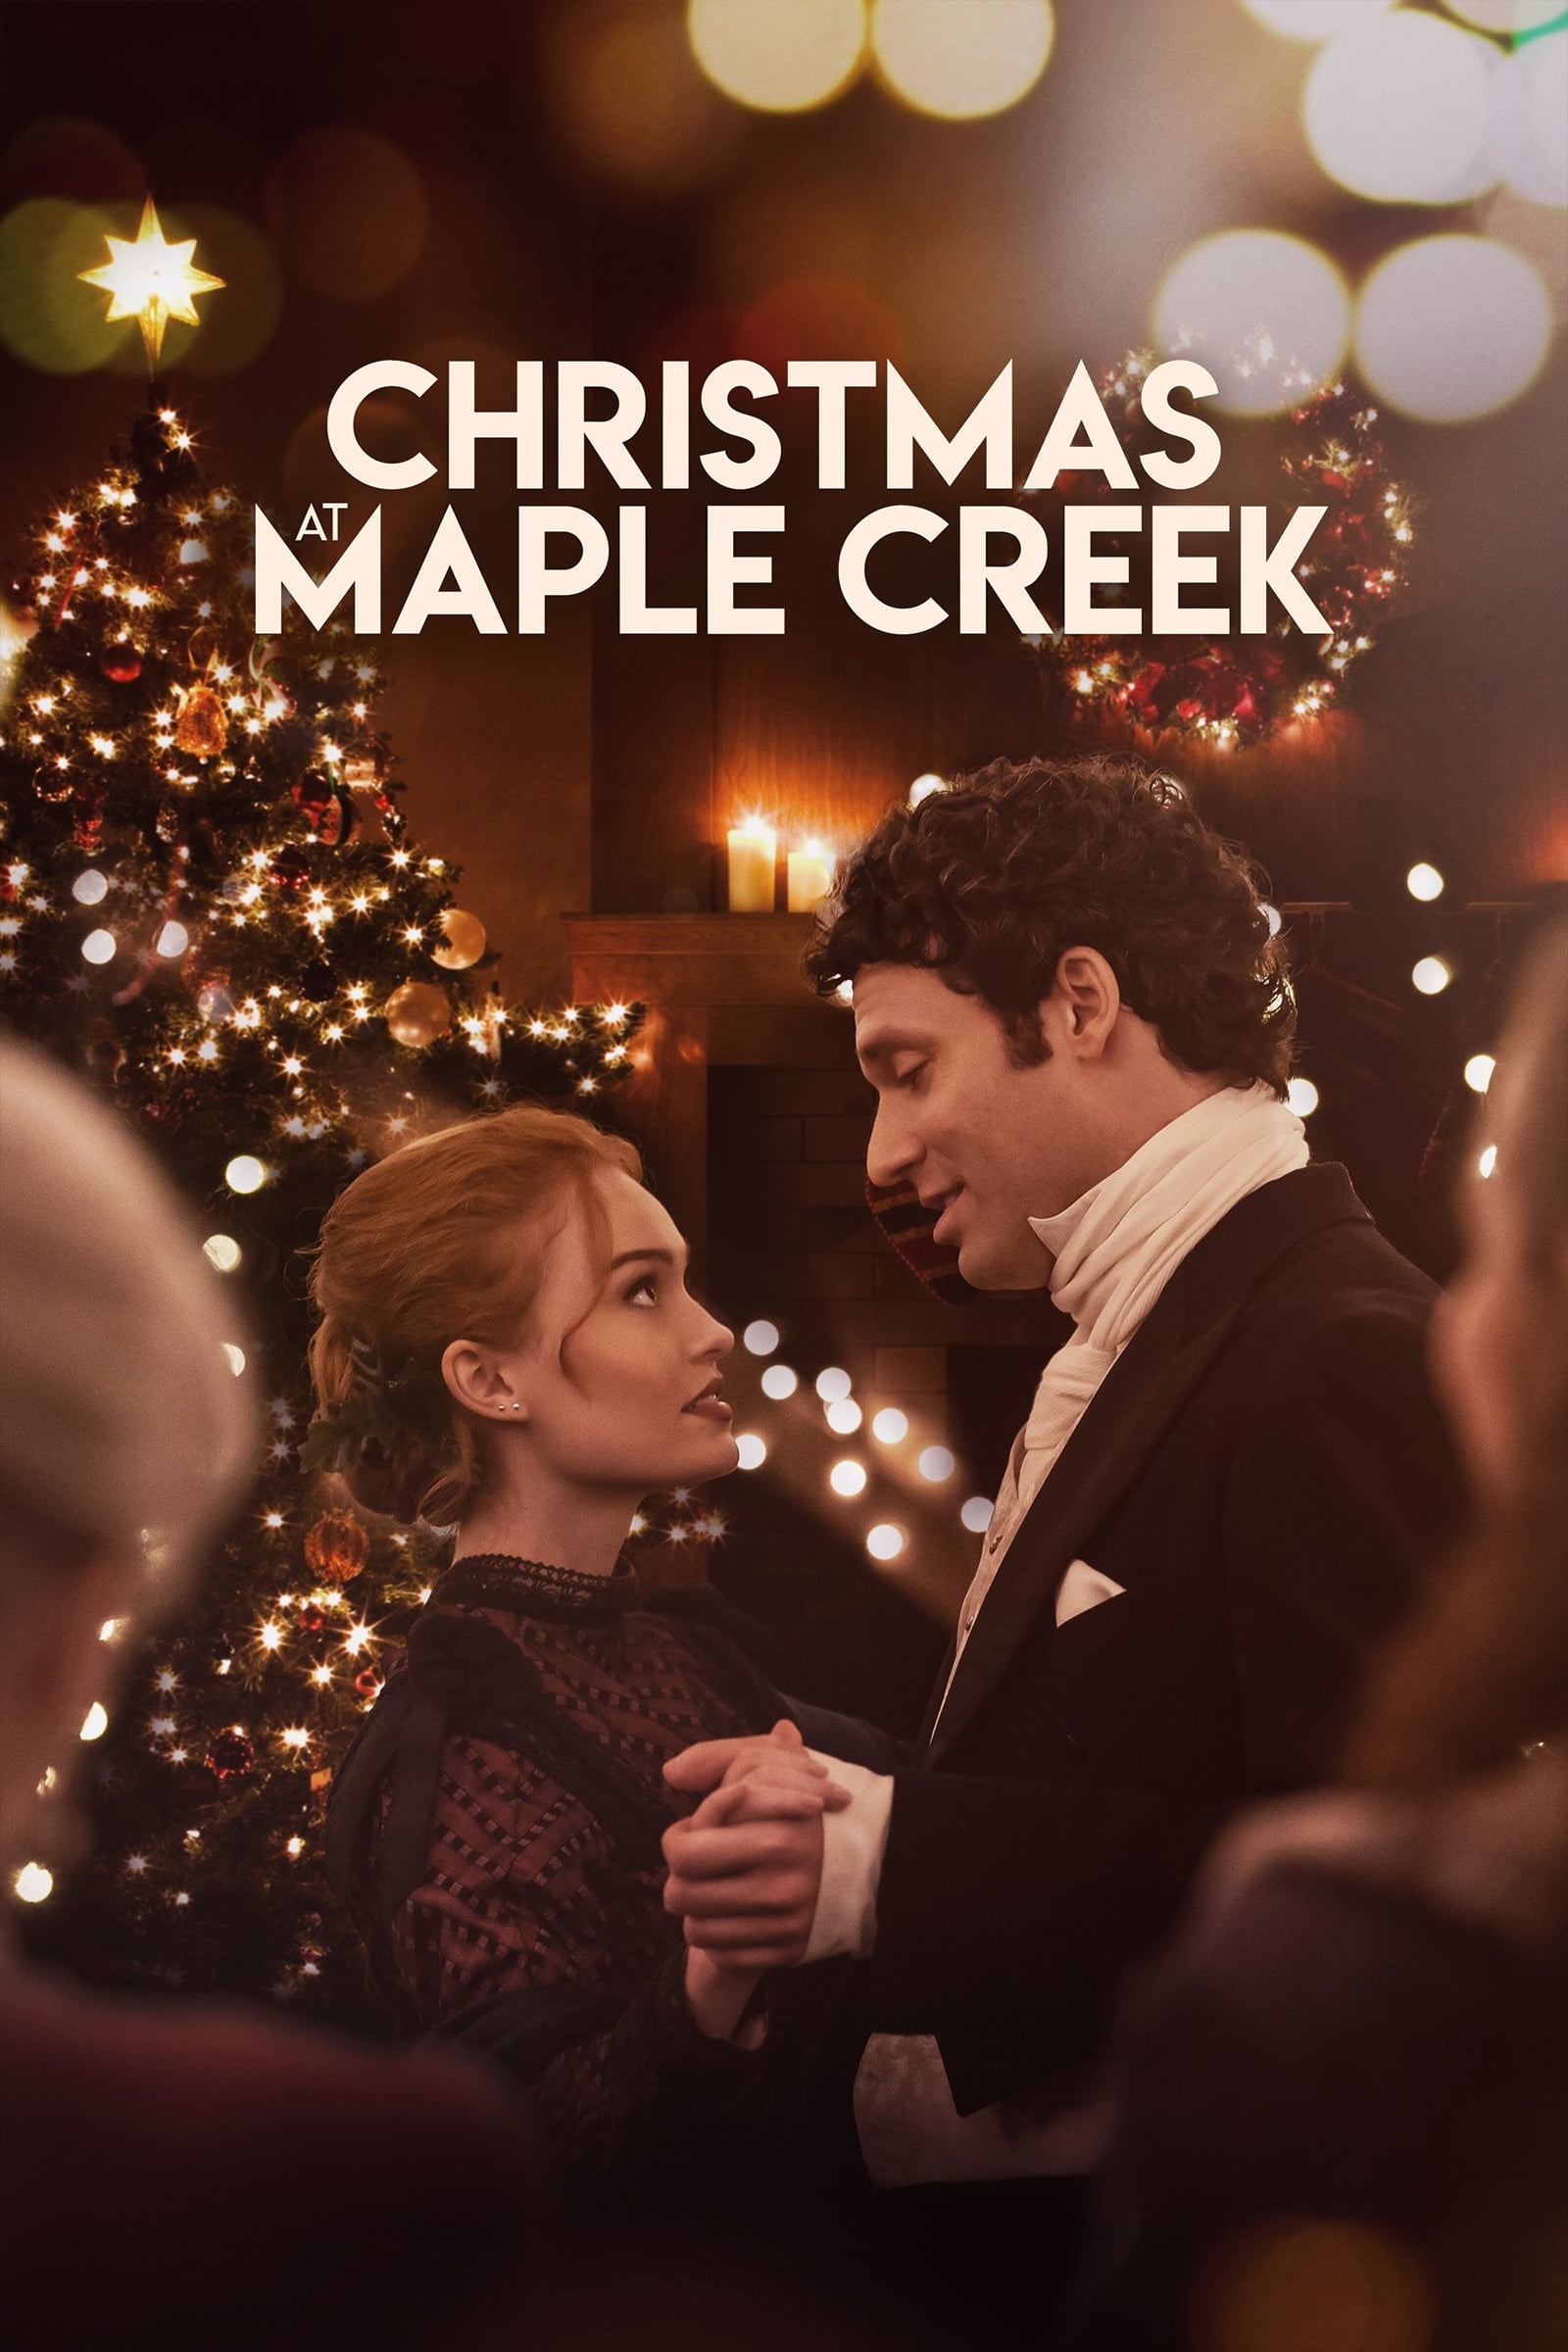 Christmas at Maple Creek (2020) Movie. Where To Watch Streaming Online